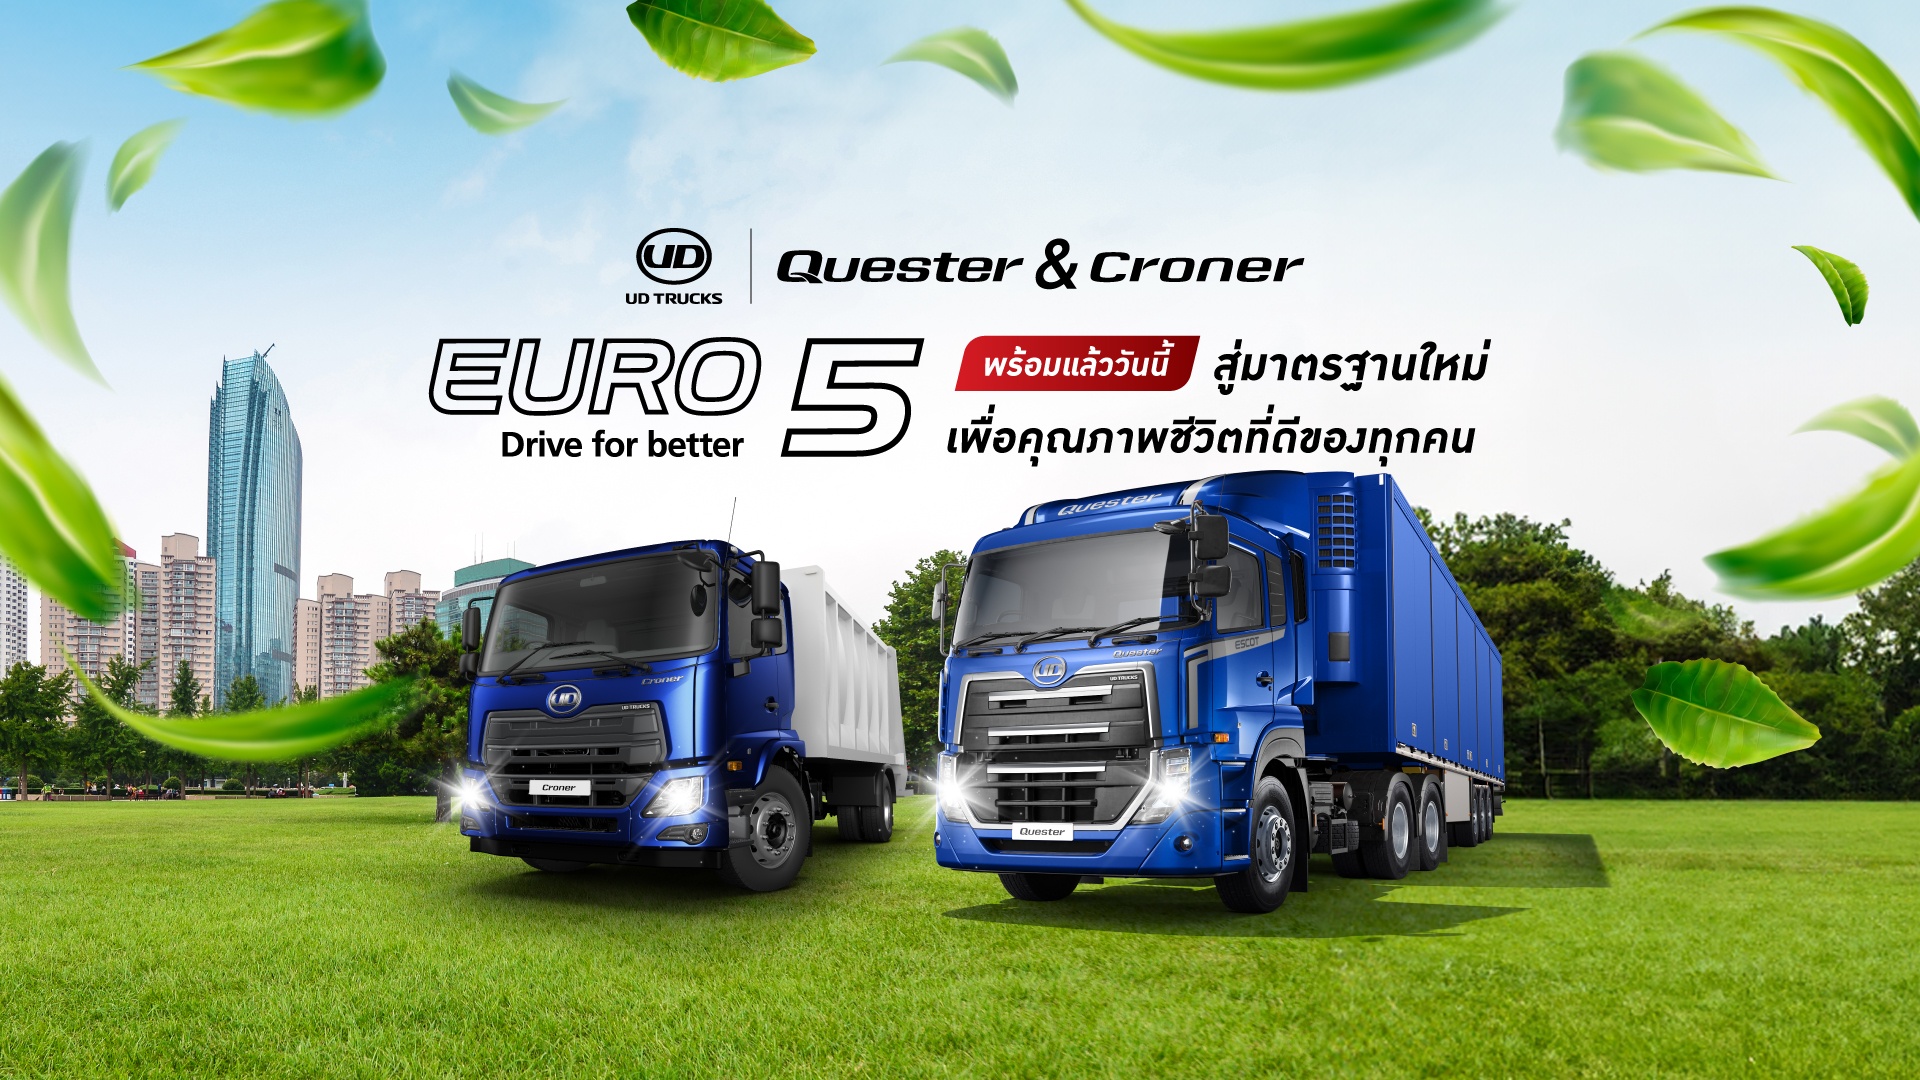 UD Trucks Euro 5 is ready now!